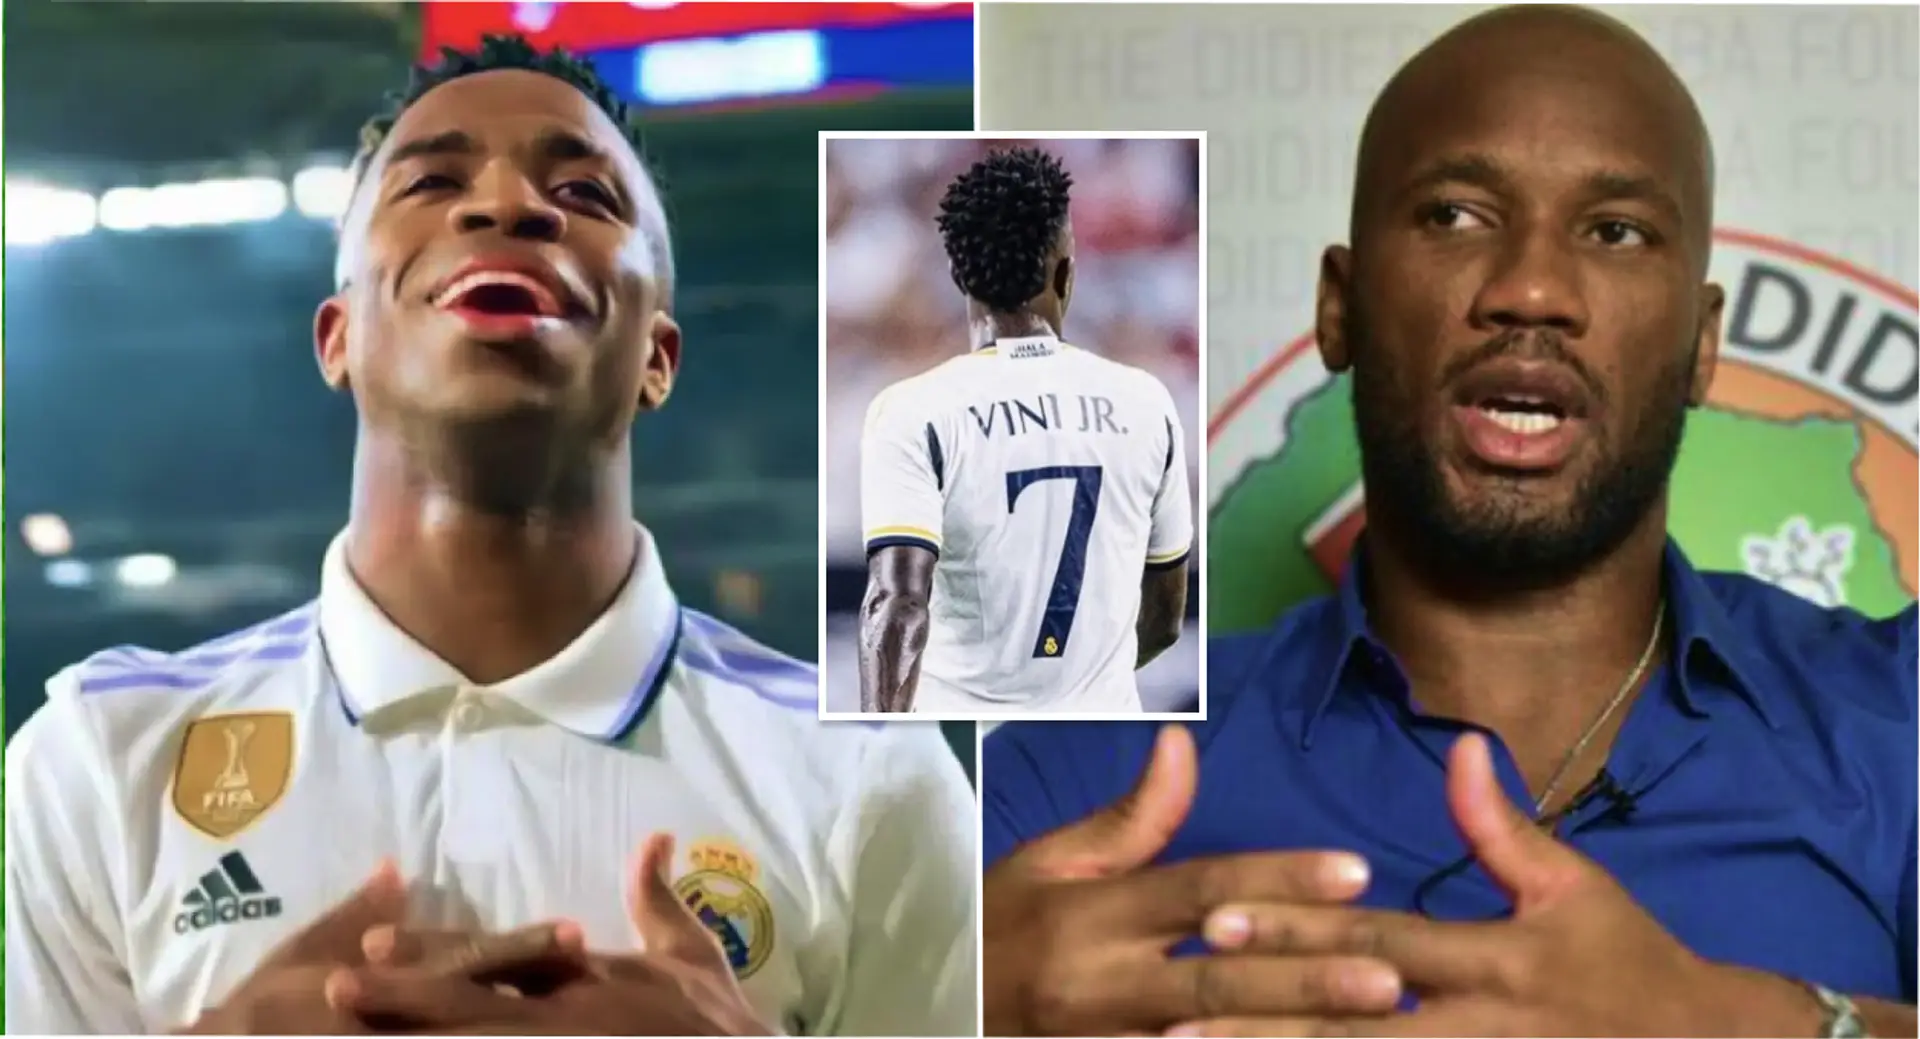 Didier Drogba names 'the only way' Vinicius can defend himself against racist abuse